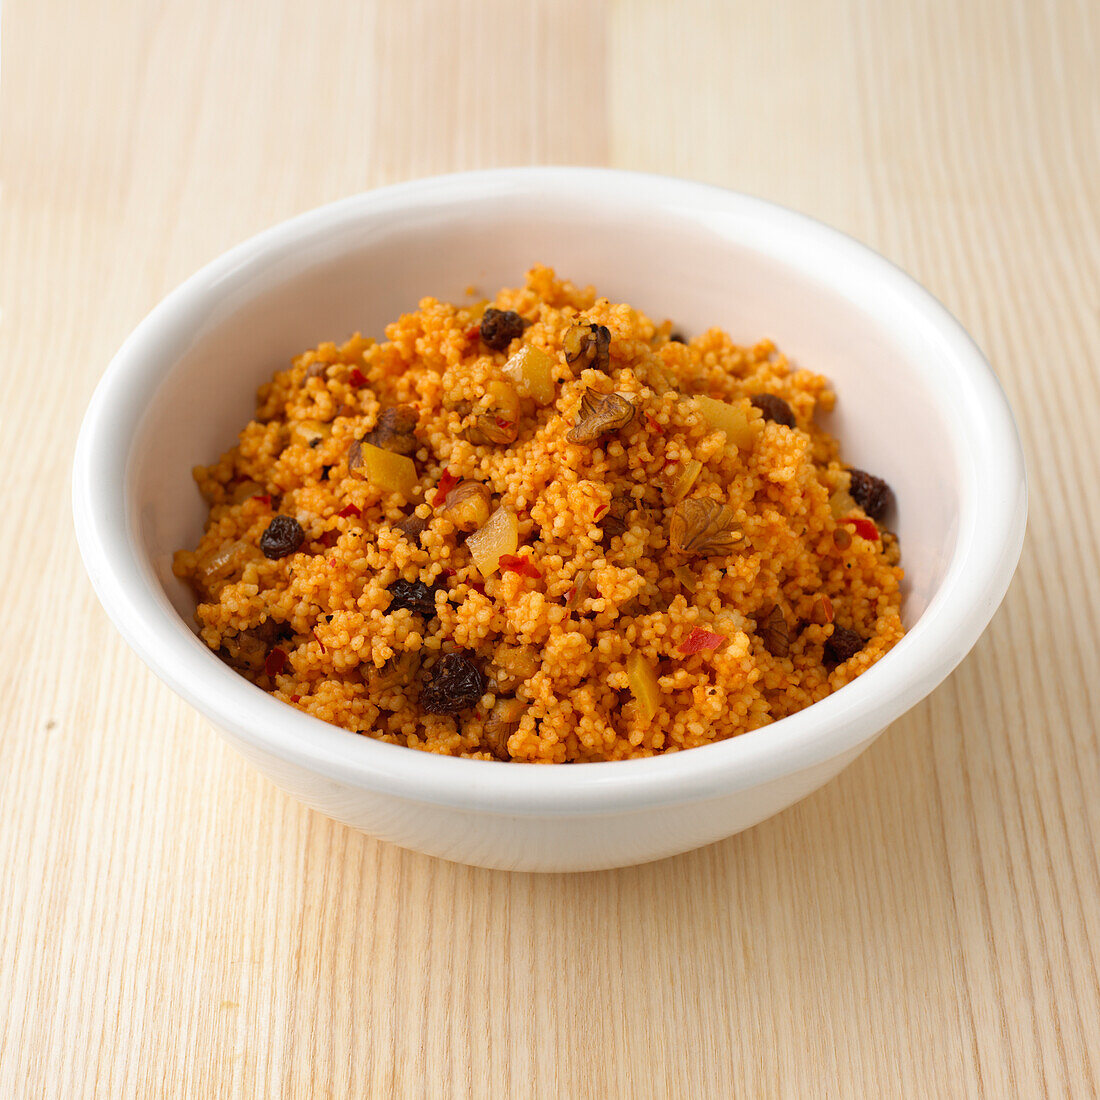 Couscous stuffing with harissa and walnuts